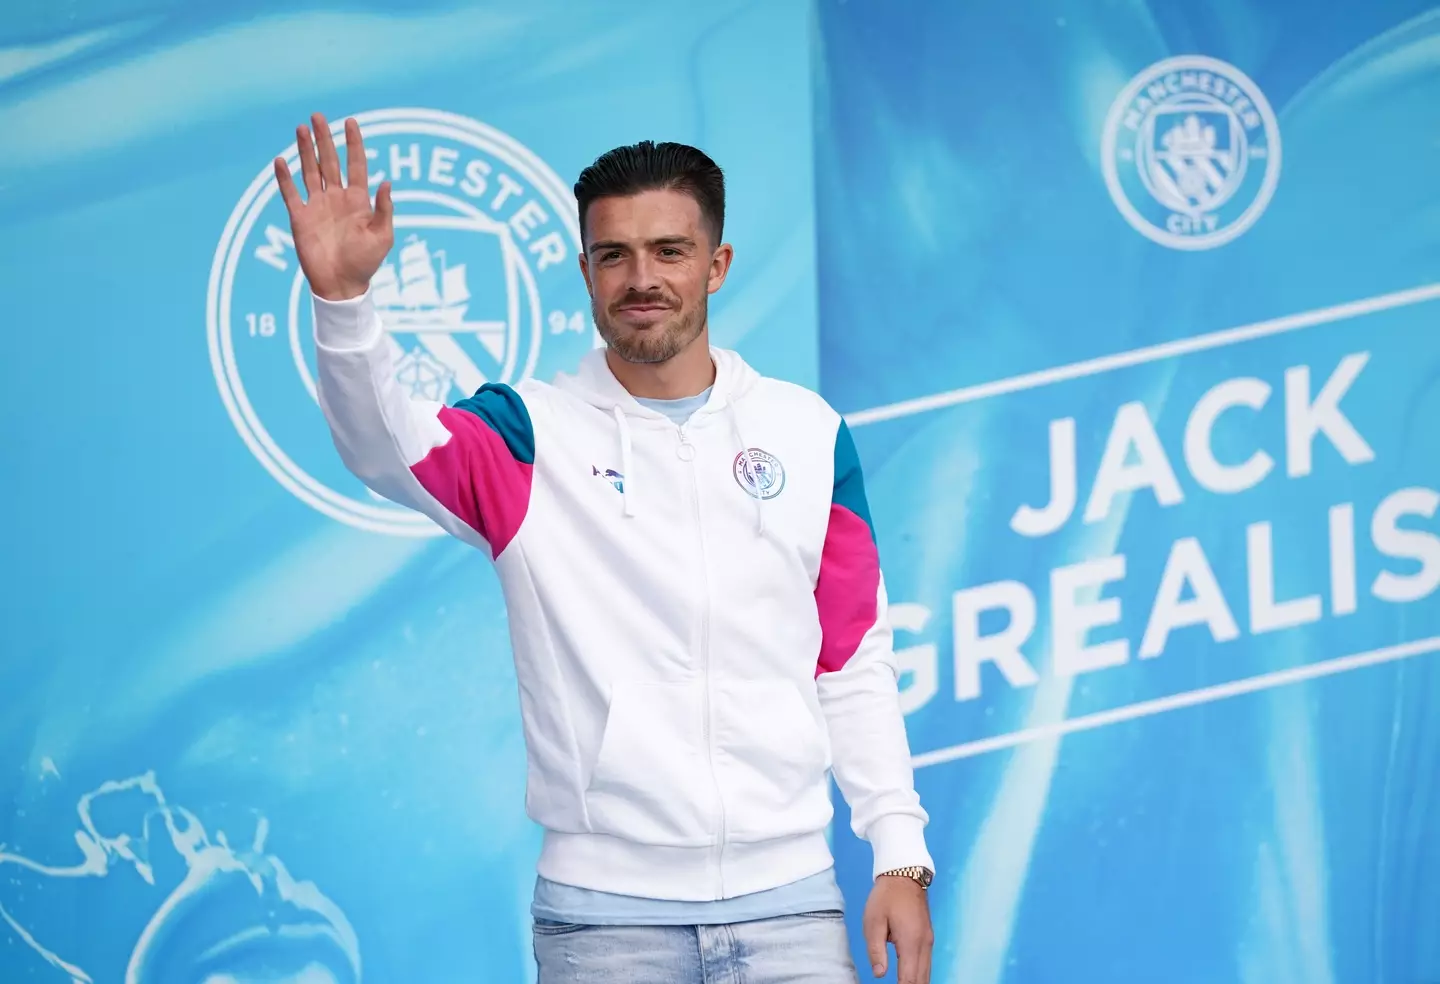 Grealish's arrival will be enough to help keep the title at City according to most. Image: PA Images